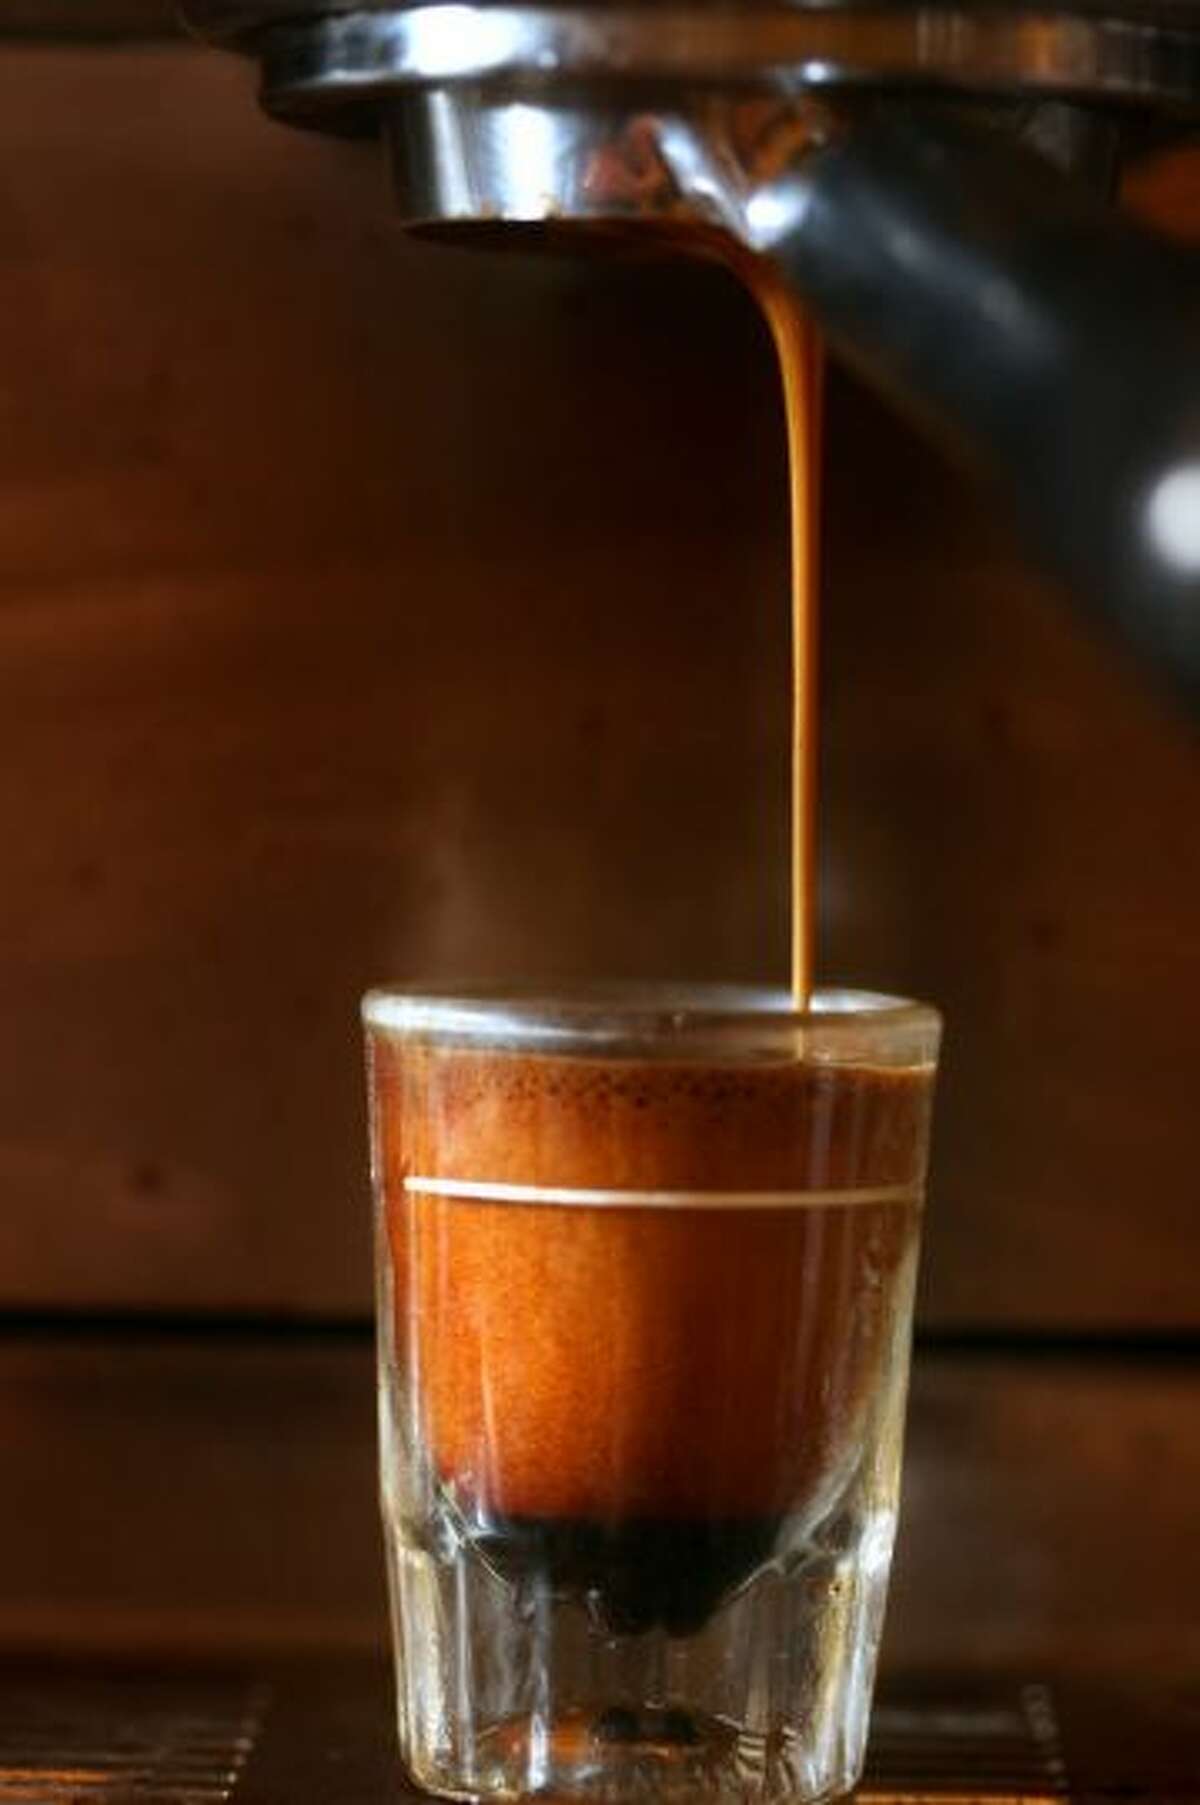 9. New York City, N.Y. - Coffee purist shop, Joe the Art of Coffee (pictured), is one reason why NYC made it into Travel + Leisure's top 10 list of best coffee cities. (Photo, of espresso at Joe The Art of Coffee, by Boston Globe, via Getty Images).